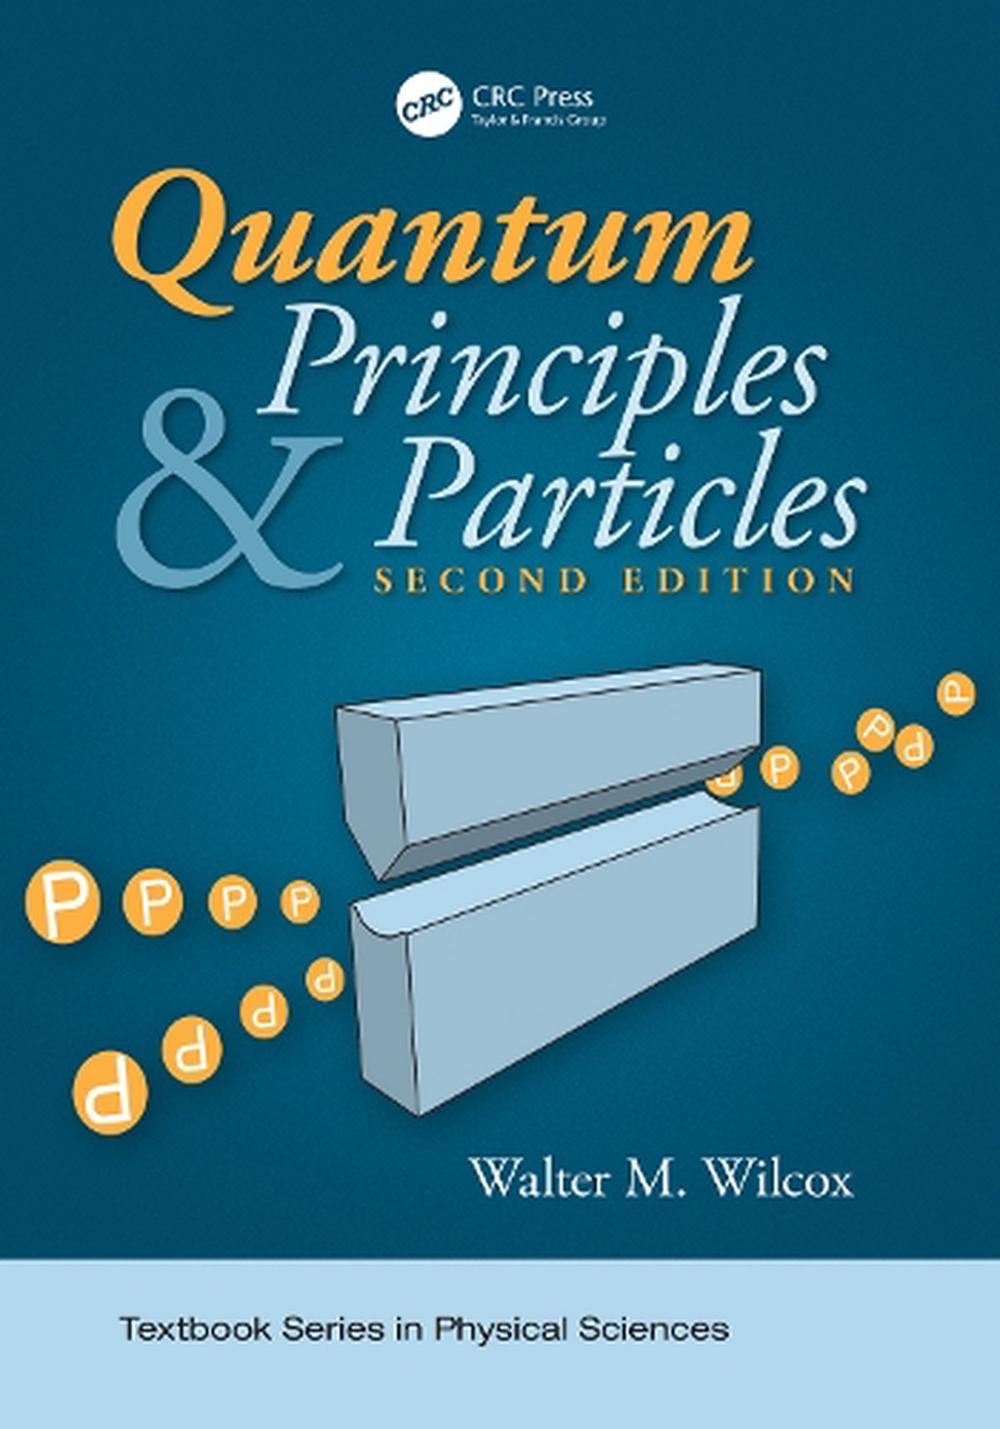 what is the book of quantum